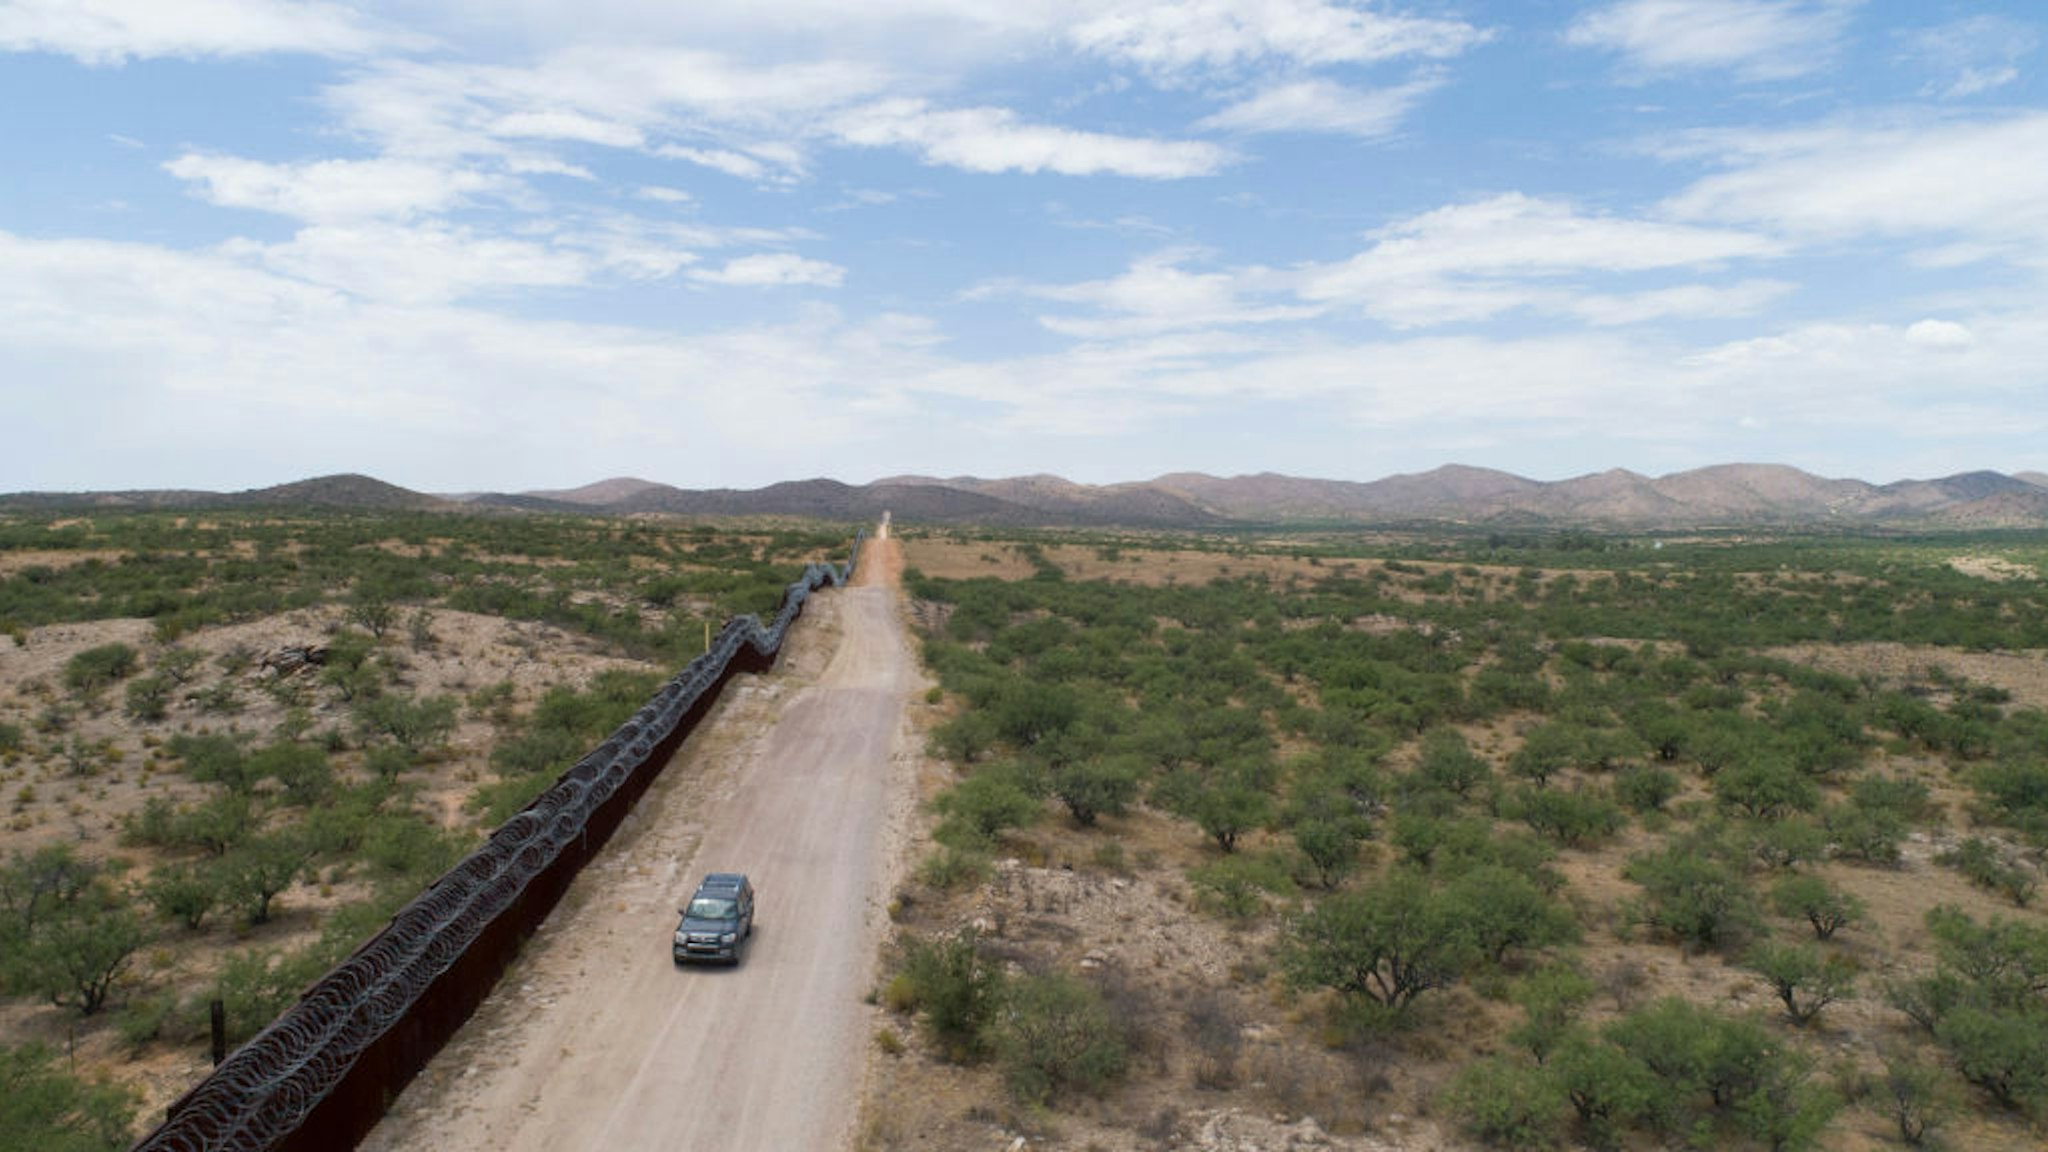 A Green Valley-Sahuarita Samaritans vehicle patrols the border fence in Sasabe, Arizona, on July 14, 2019. - Volunteers of the Green Valley-Sahuarita Samaritans offer humanitarian aid to migrants in the Arizona-Sonora borderlands with Mexico. (Photo by Daniel Woolfolk for AFP / AFP) (Photo credit should read DANIEL WOOLFOLK FOR AFP/AFP via Getty Images)